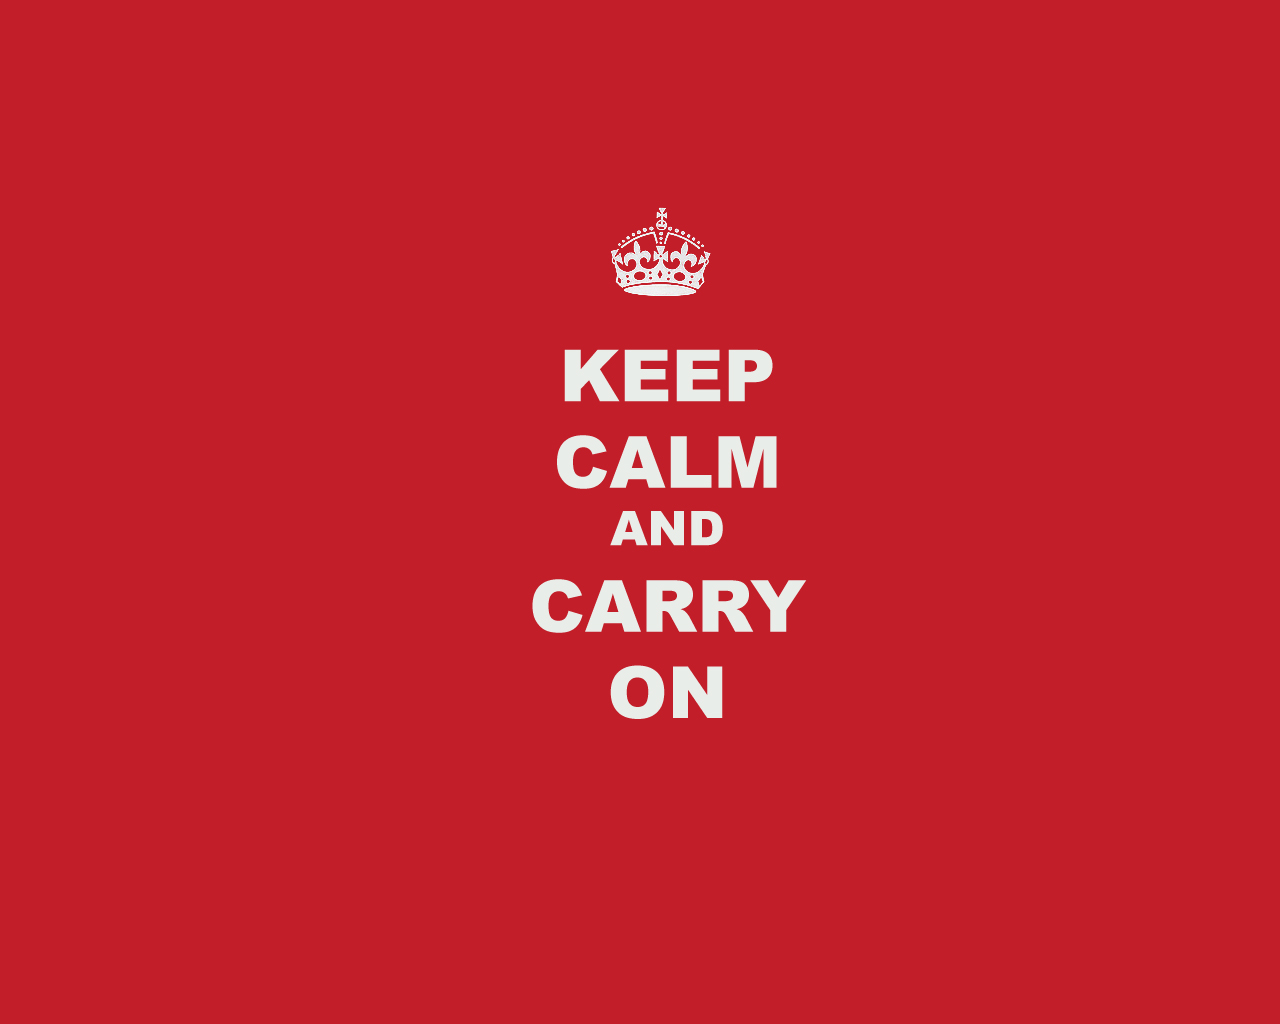 Keep Calm and Carry On wallpapers Keep Calm and Carry On stock 1280x1024